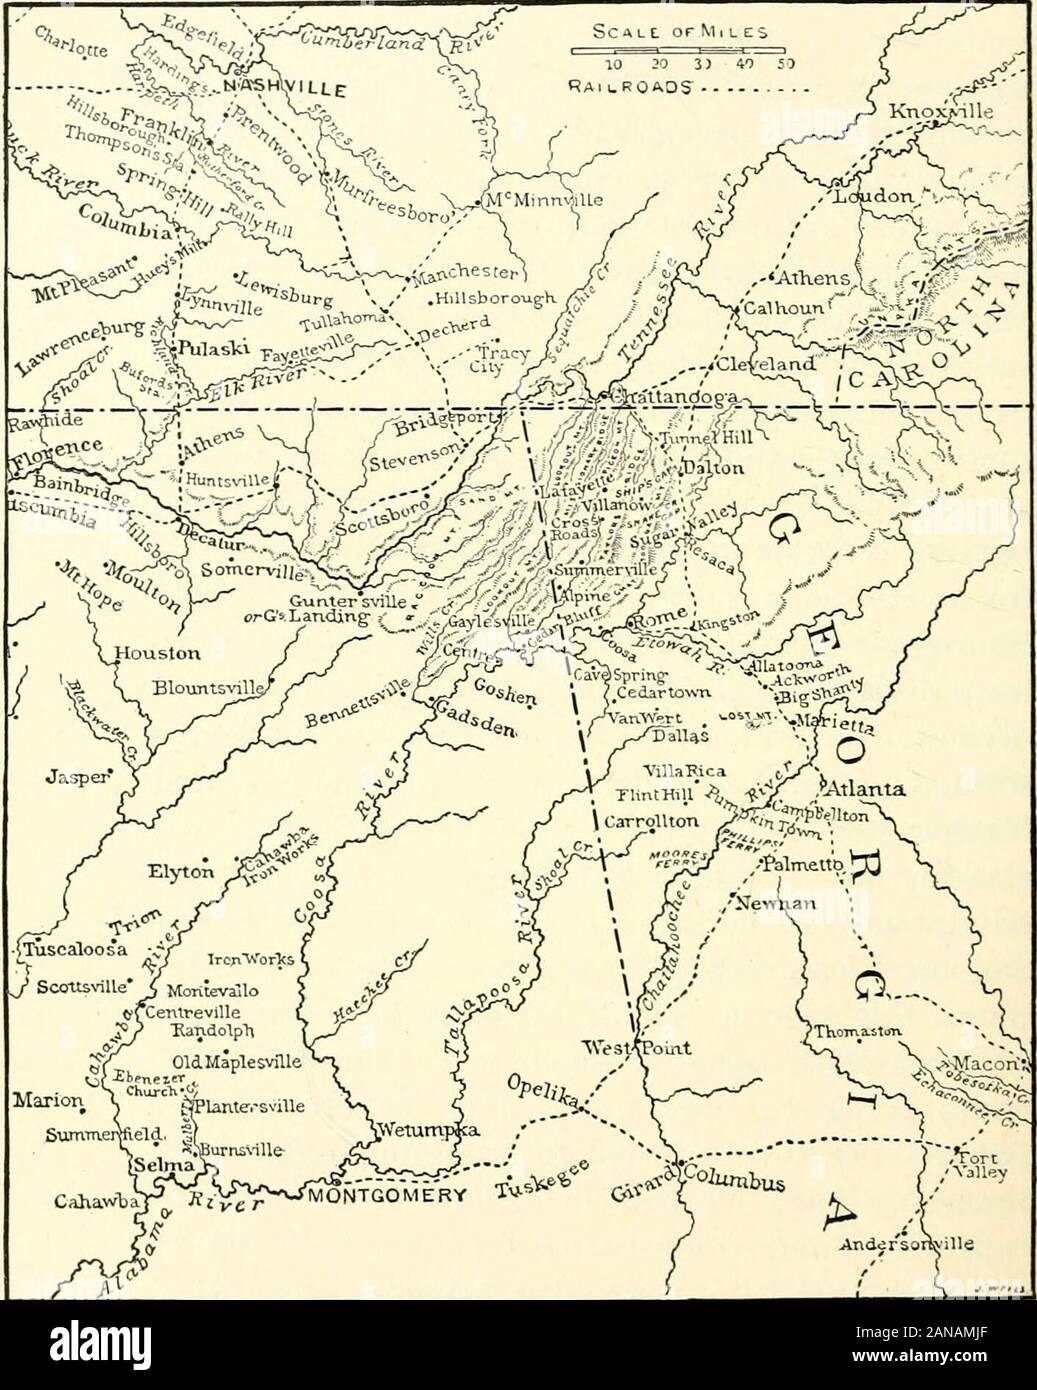 Abraham Lincoln : a history . chof railroad track, and capturing some mules andhorses; but this movement, comparatively success- iua., p. 199.ful as it was, produced no effect whatever uponShermans general plans. He ordered John New-tons division to Chattanooga and John M. Corsesdivision to Rome, and adopting what measuresseemed to him expedient for the repairing andfurther protection of the roads, pushed his forcessteadily on by the right flank. He even tookadvantage of the absence of Wheeler to throwJudson Kilpatrick with a large force of cavalryupon the Macon road. Kilpatrick, with celer-it Stock Photo